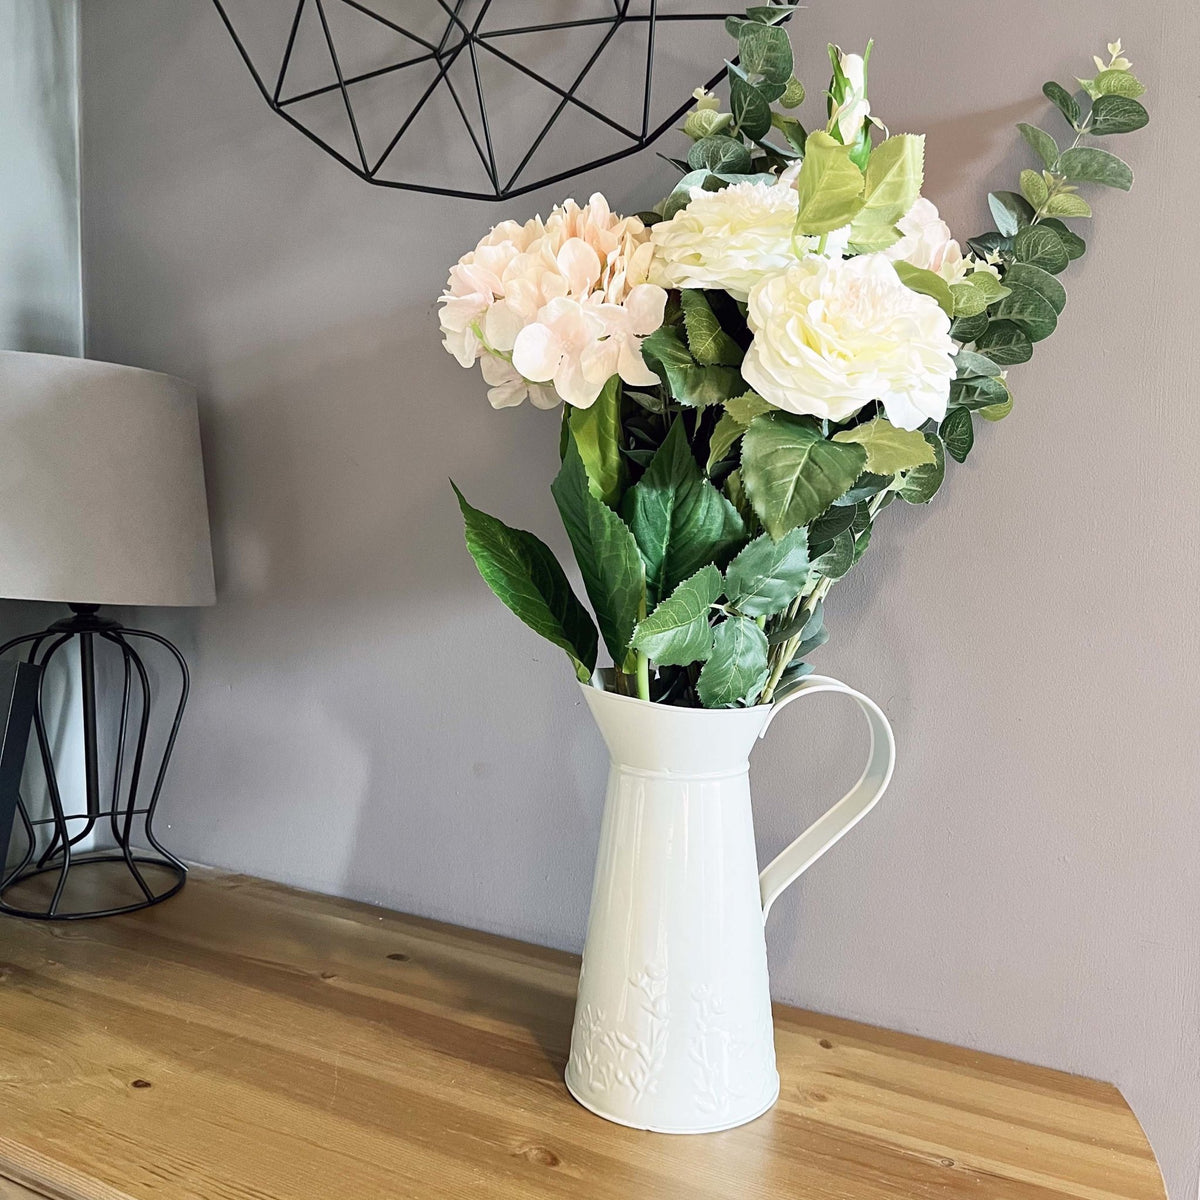 White Garden Rose Spray in a water jug vase on a wooden table with black geometric mirror and lamp